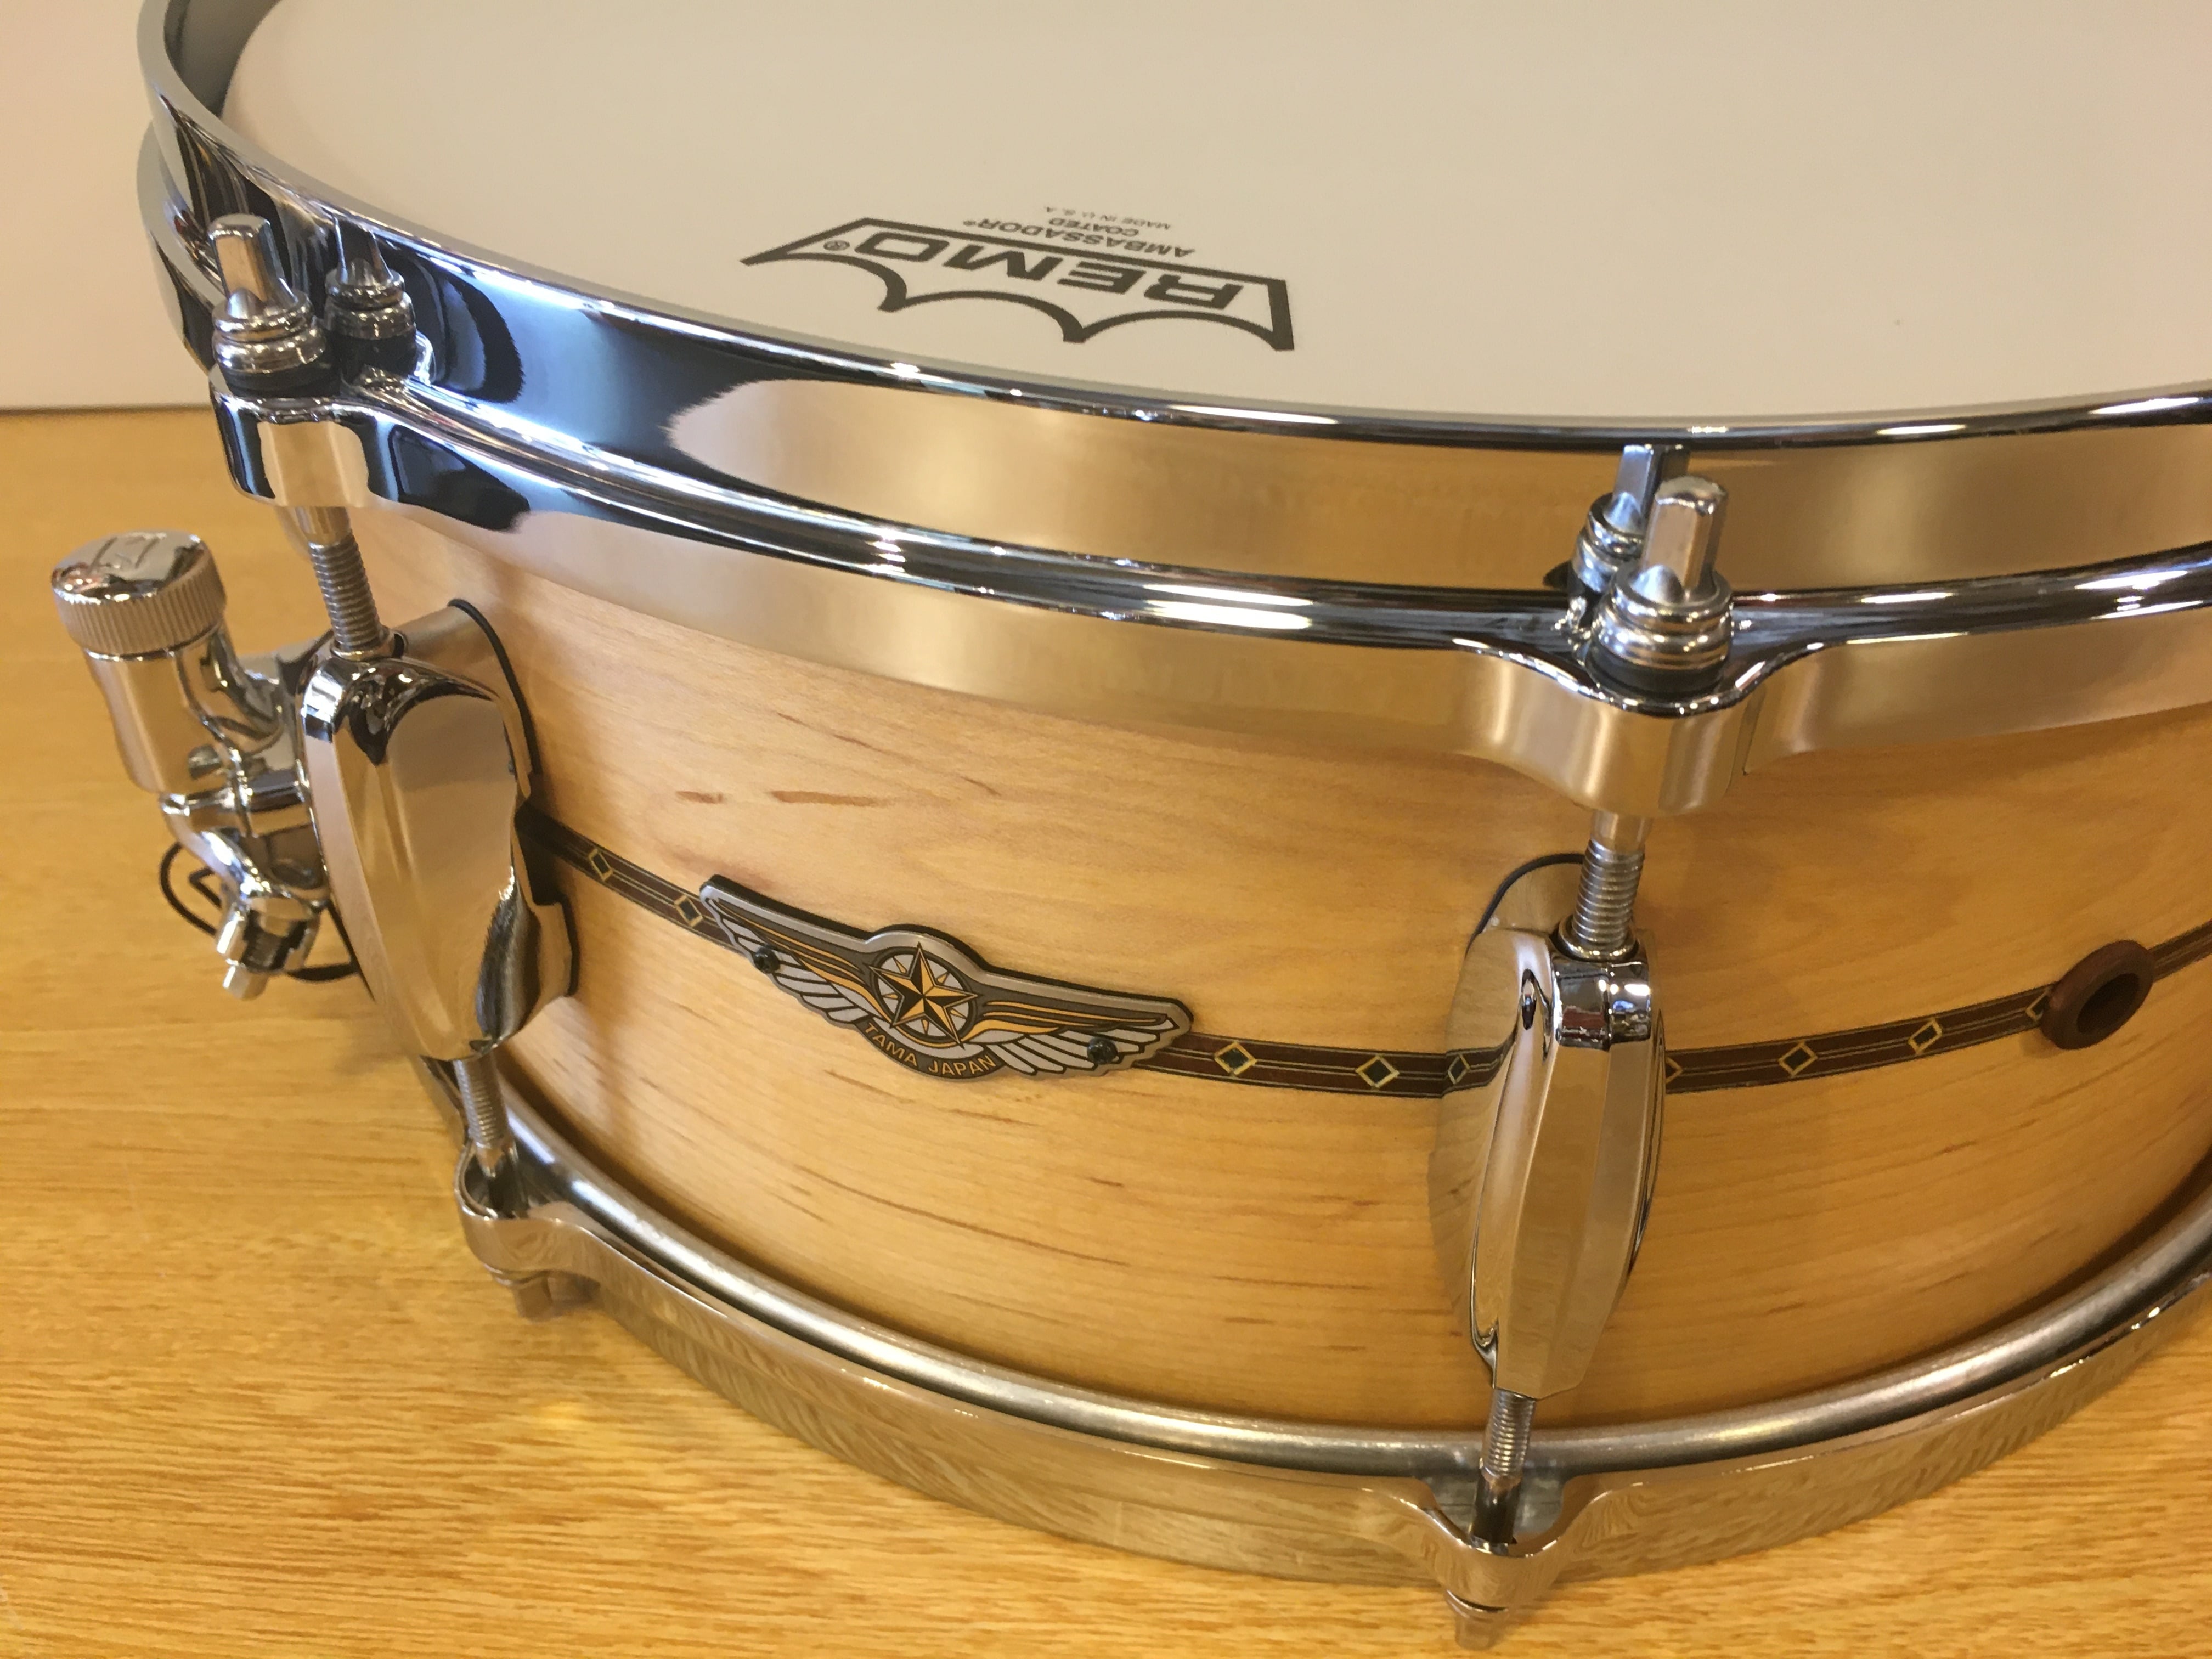 TAMA STAR SOLID MAPLE SNARE14x6 TLM146S/ スター ソリッドメイプル